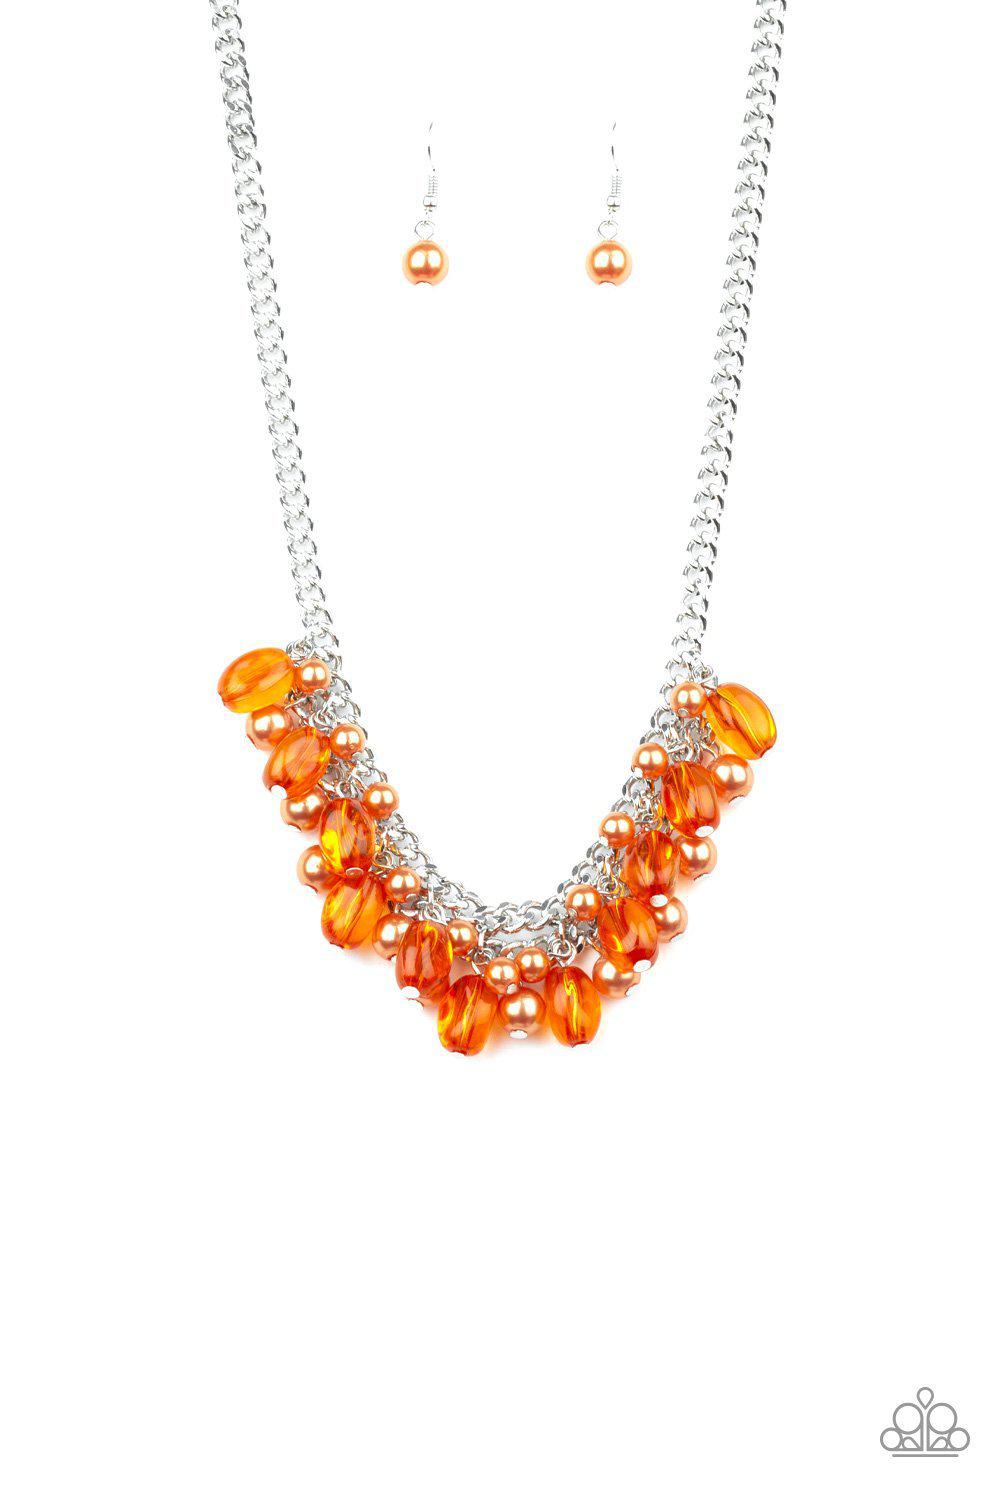 5th Avenue Flirtation Orange and Silver Necklace - Paparazzi Accessories-CarasShop.com - $5 Jewelry by Cara Jewels